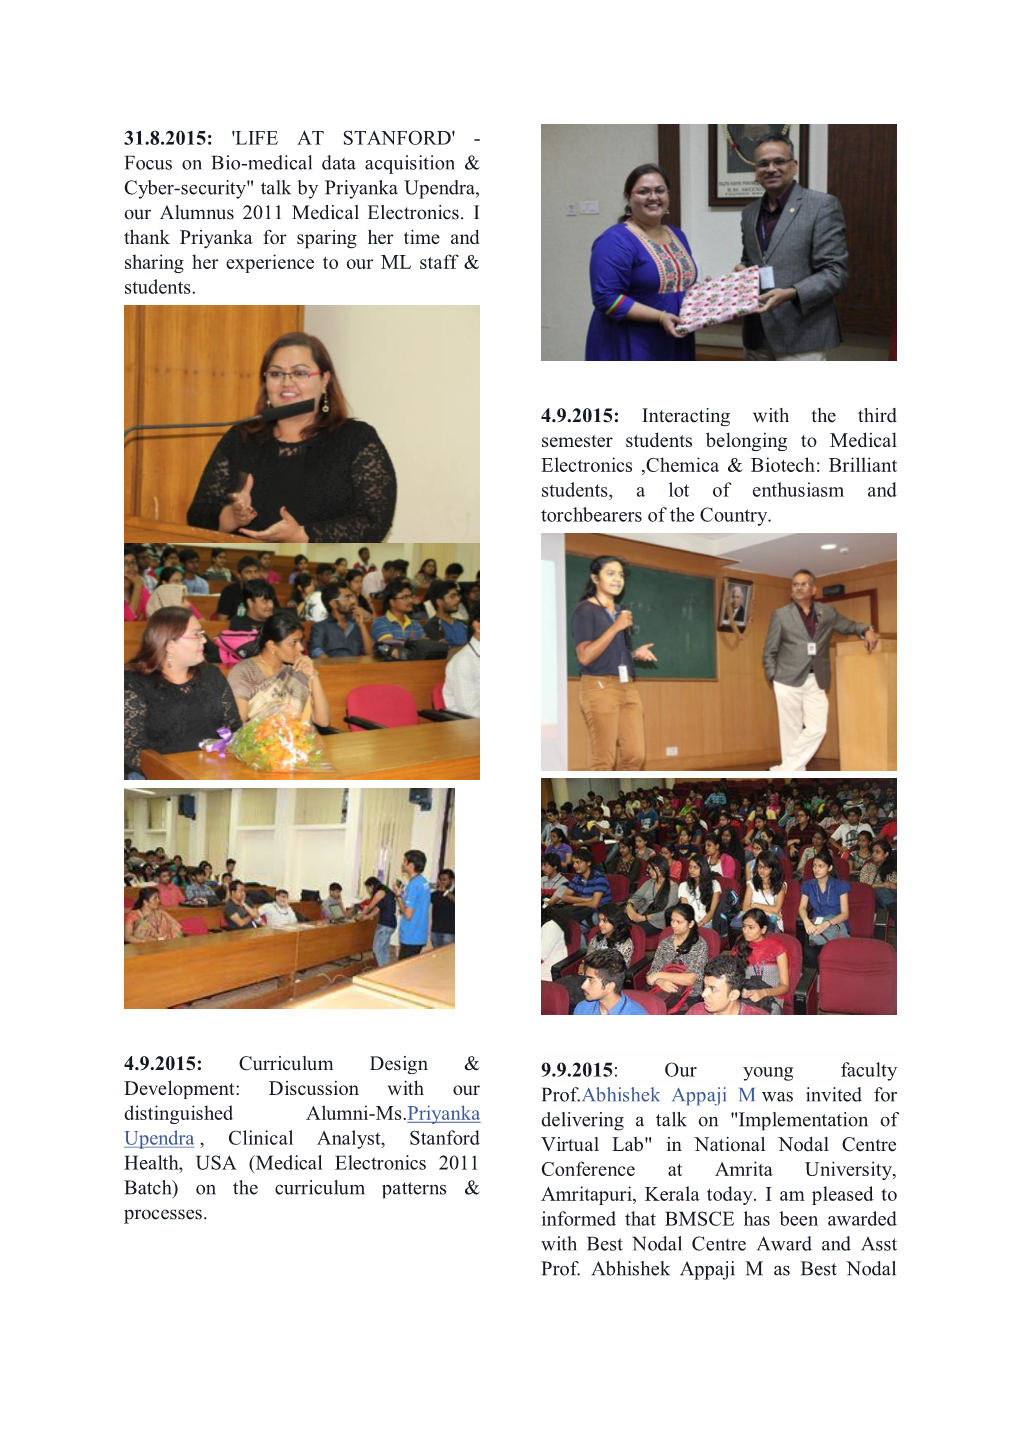 31.8.2015: 'LIFE at STANFORD' - Focus on Bio-Medical Data Acquisition & Cyber-Security" Talk by Priyanka Upendra, Our Alumnus 2011 Medical Electronics